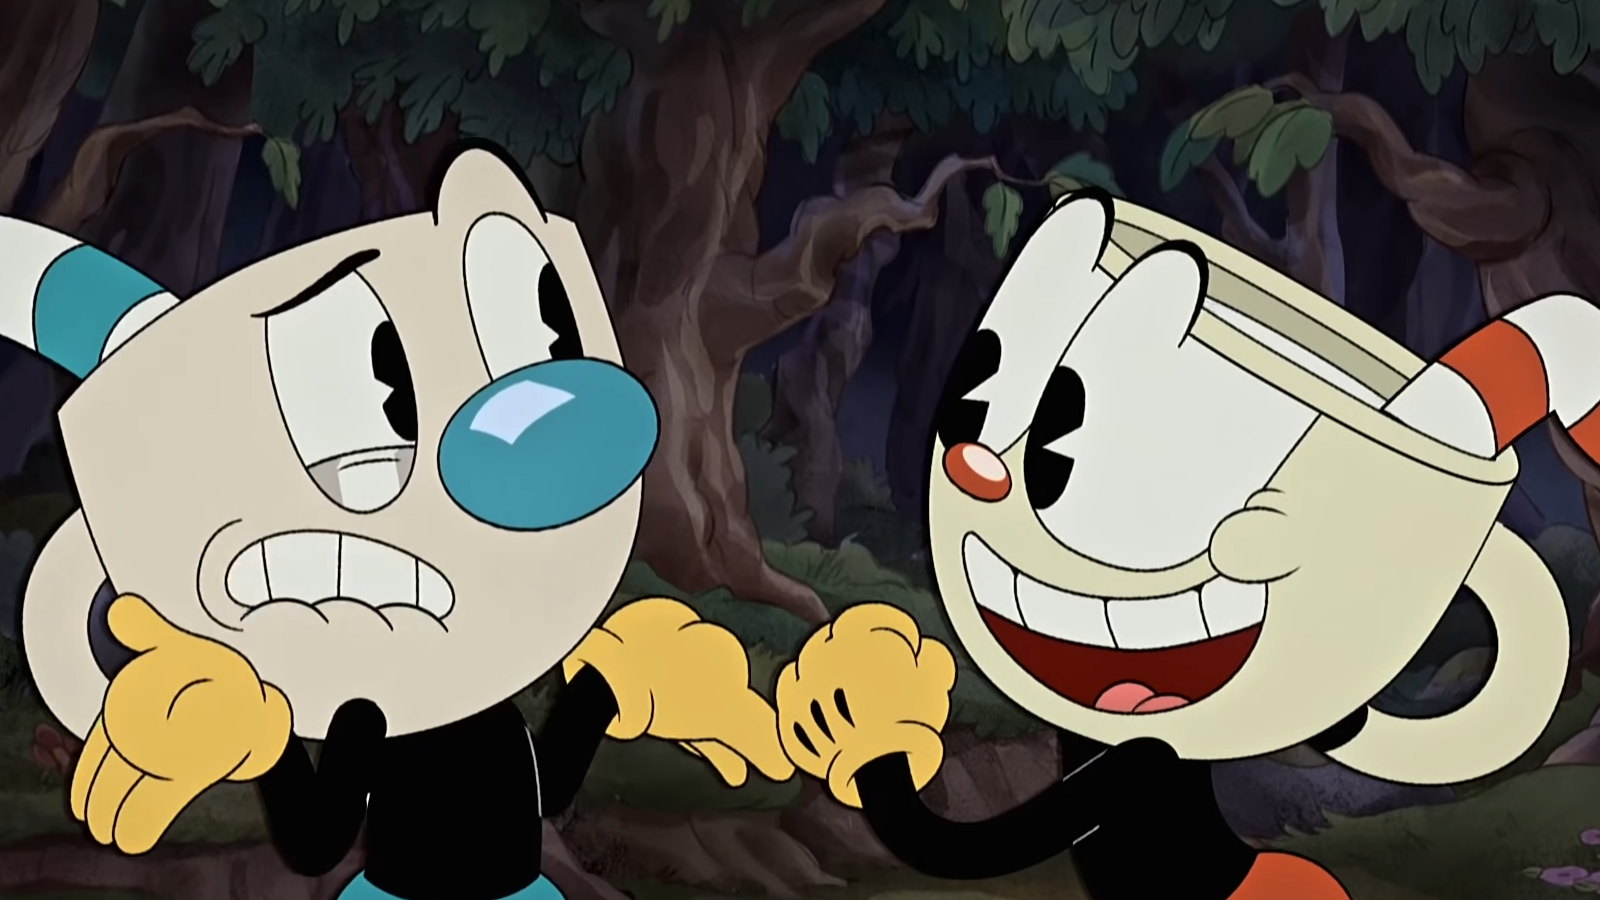 The Cuphead Show Season 2 Teaser Trailer Sets Release Date